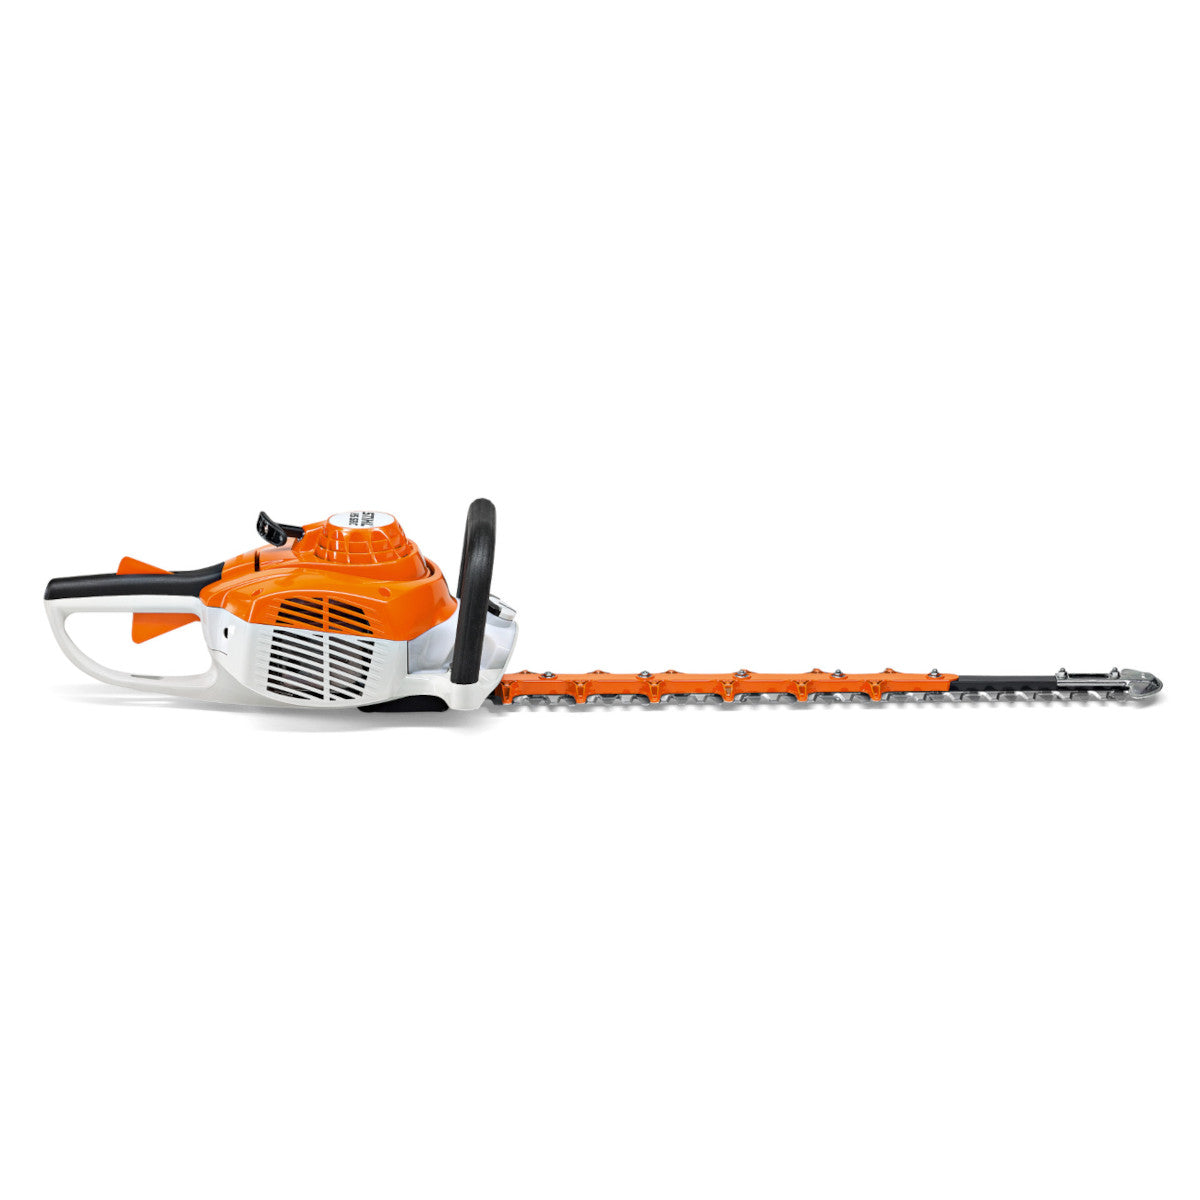 Taille-haie thermique STIHL HS 80 - Taille-haie 